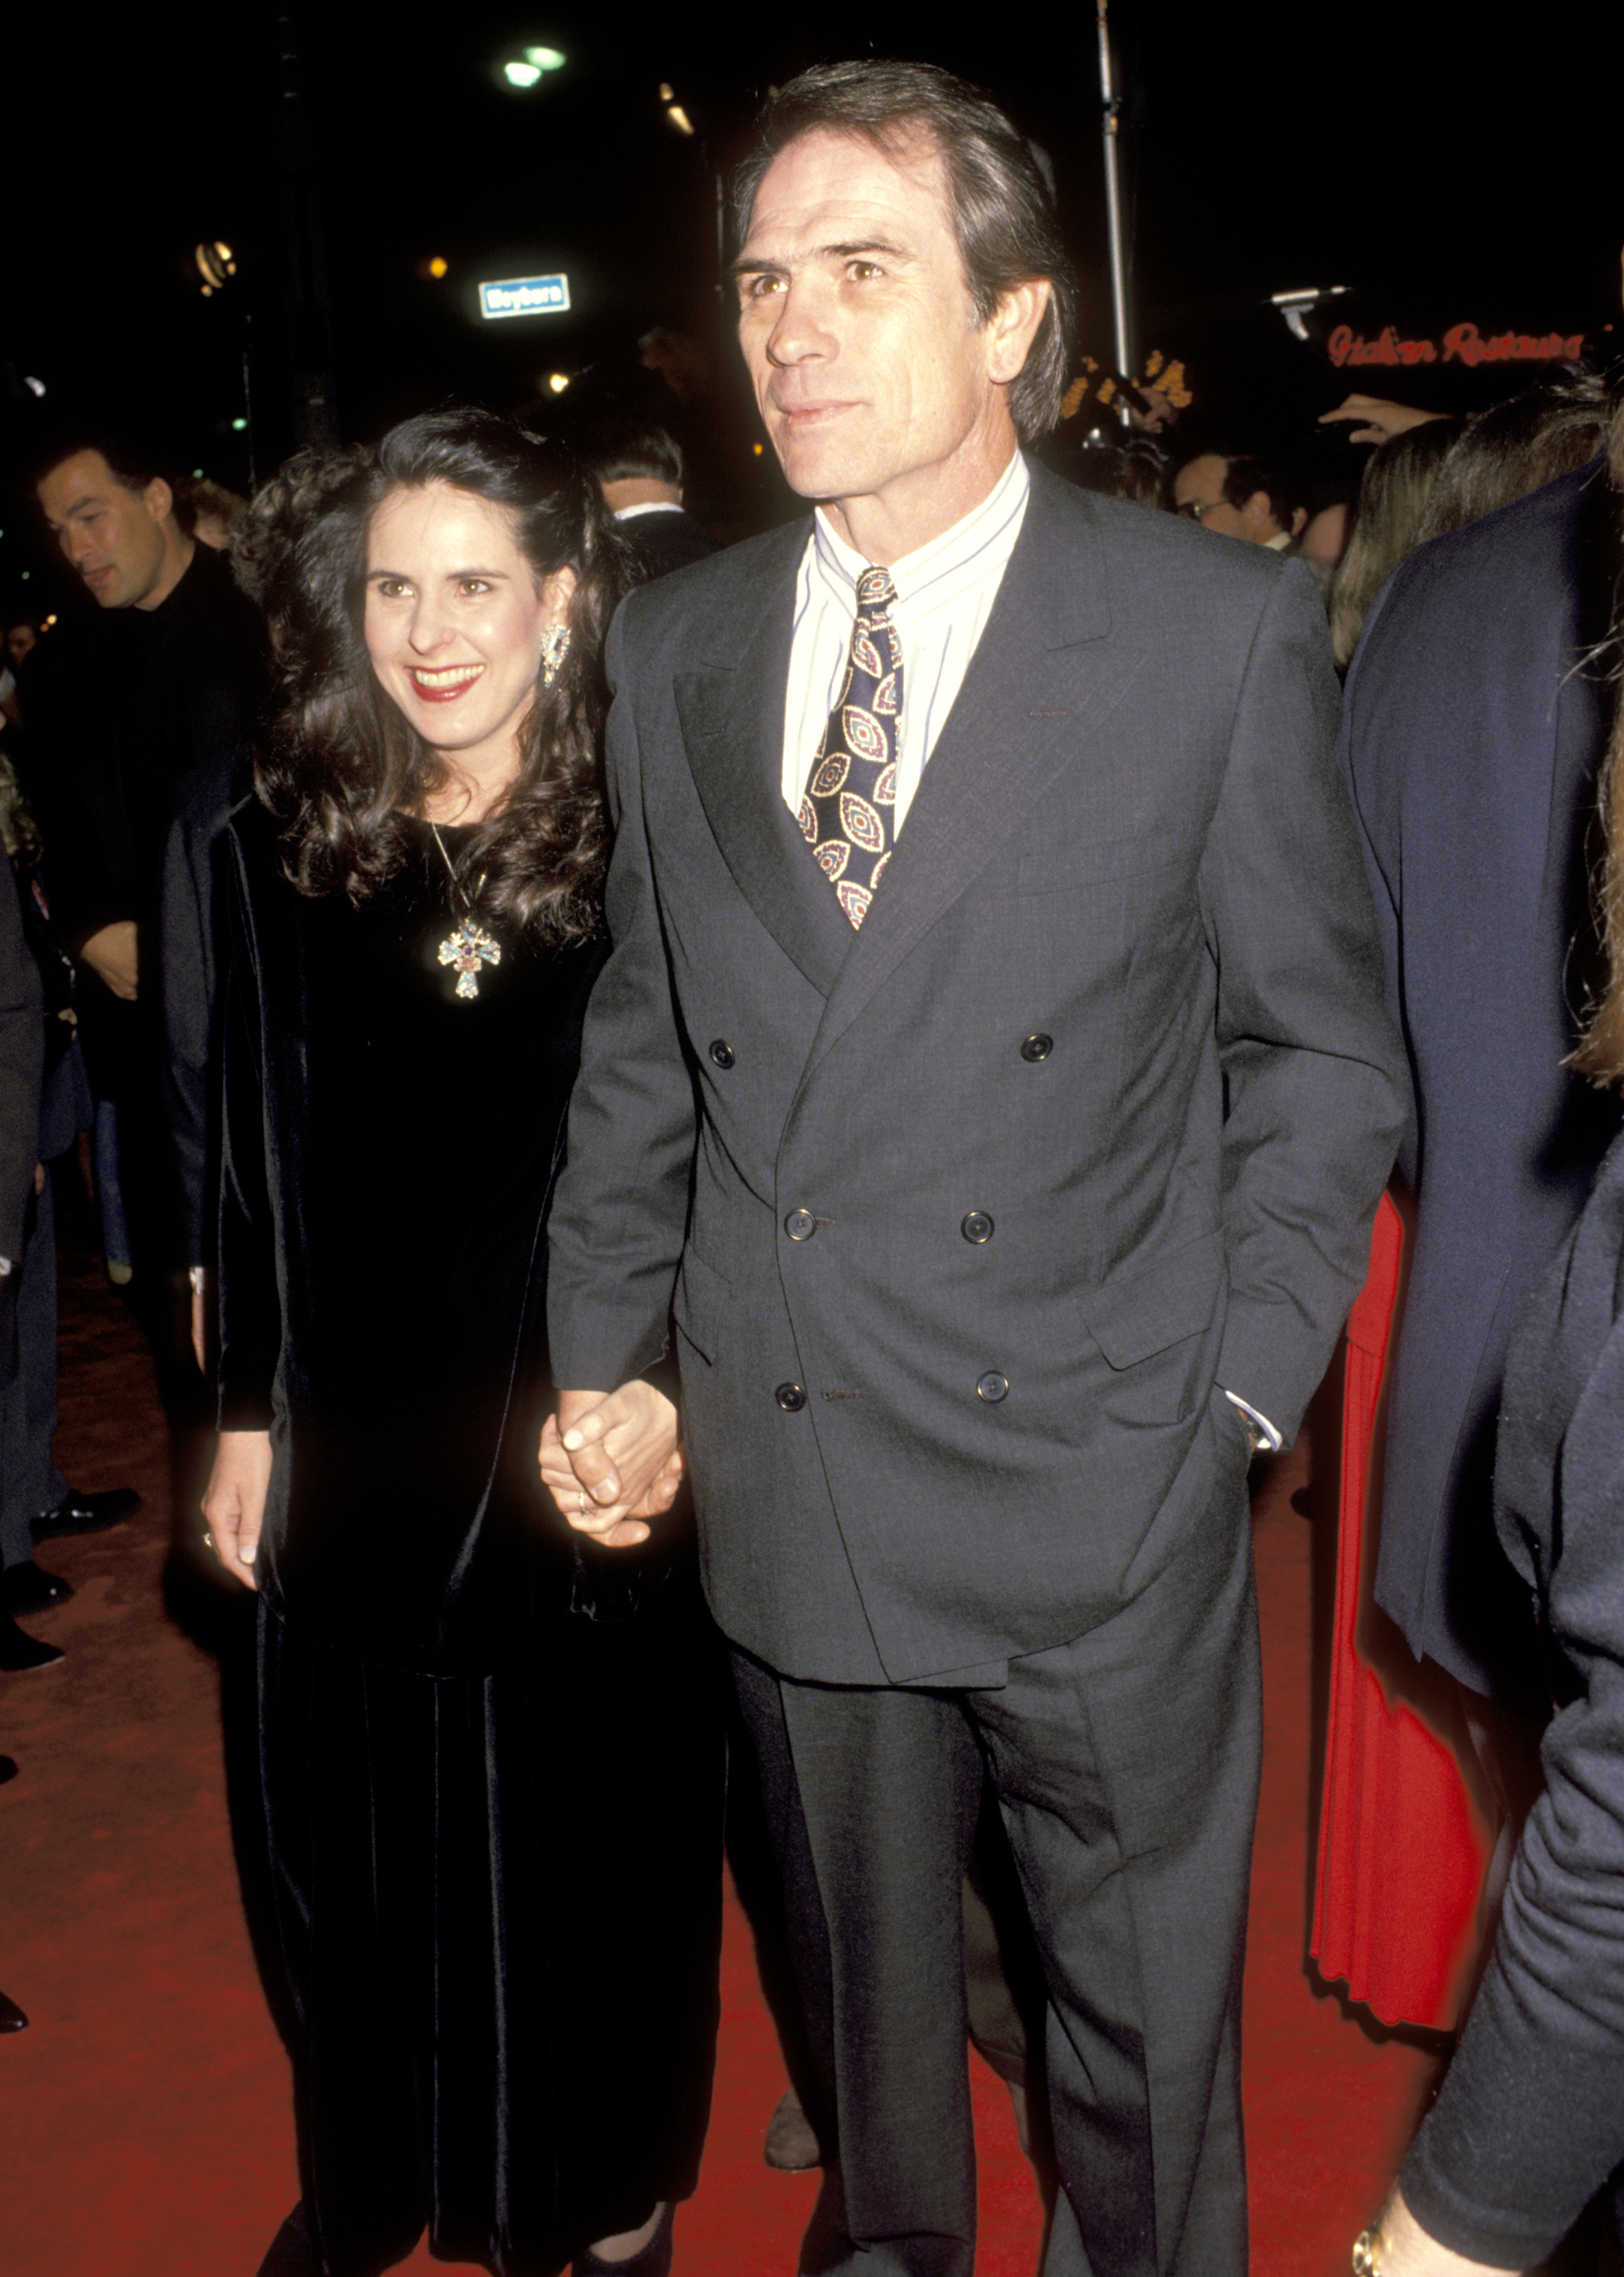 Kimberlea and Tommy Lee Jones at the Los Angeles premiere of "JFK" in Westwood, California, on December 17, 1991 | Source: Getty Images